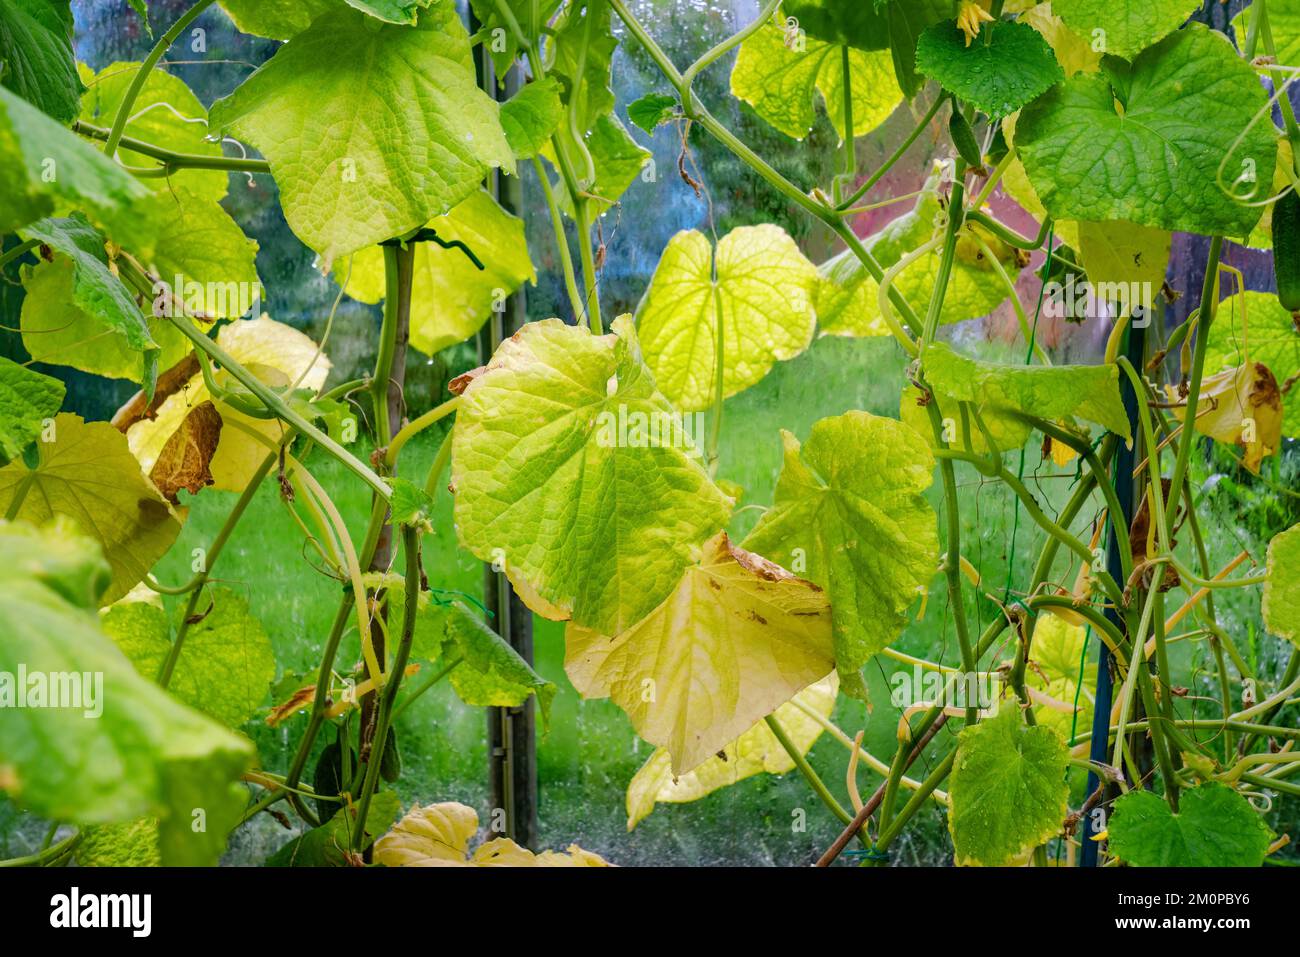 Many growing cucumber plants with yellow and green leaves affected by disease.Fungal or viral disease. Lack or excess of moisture and nutrients, close Stock Photo